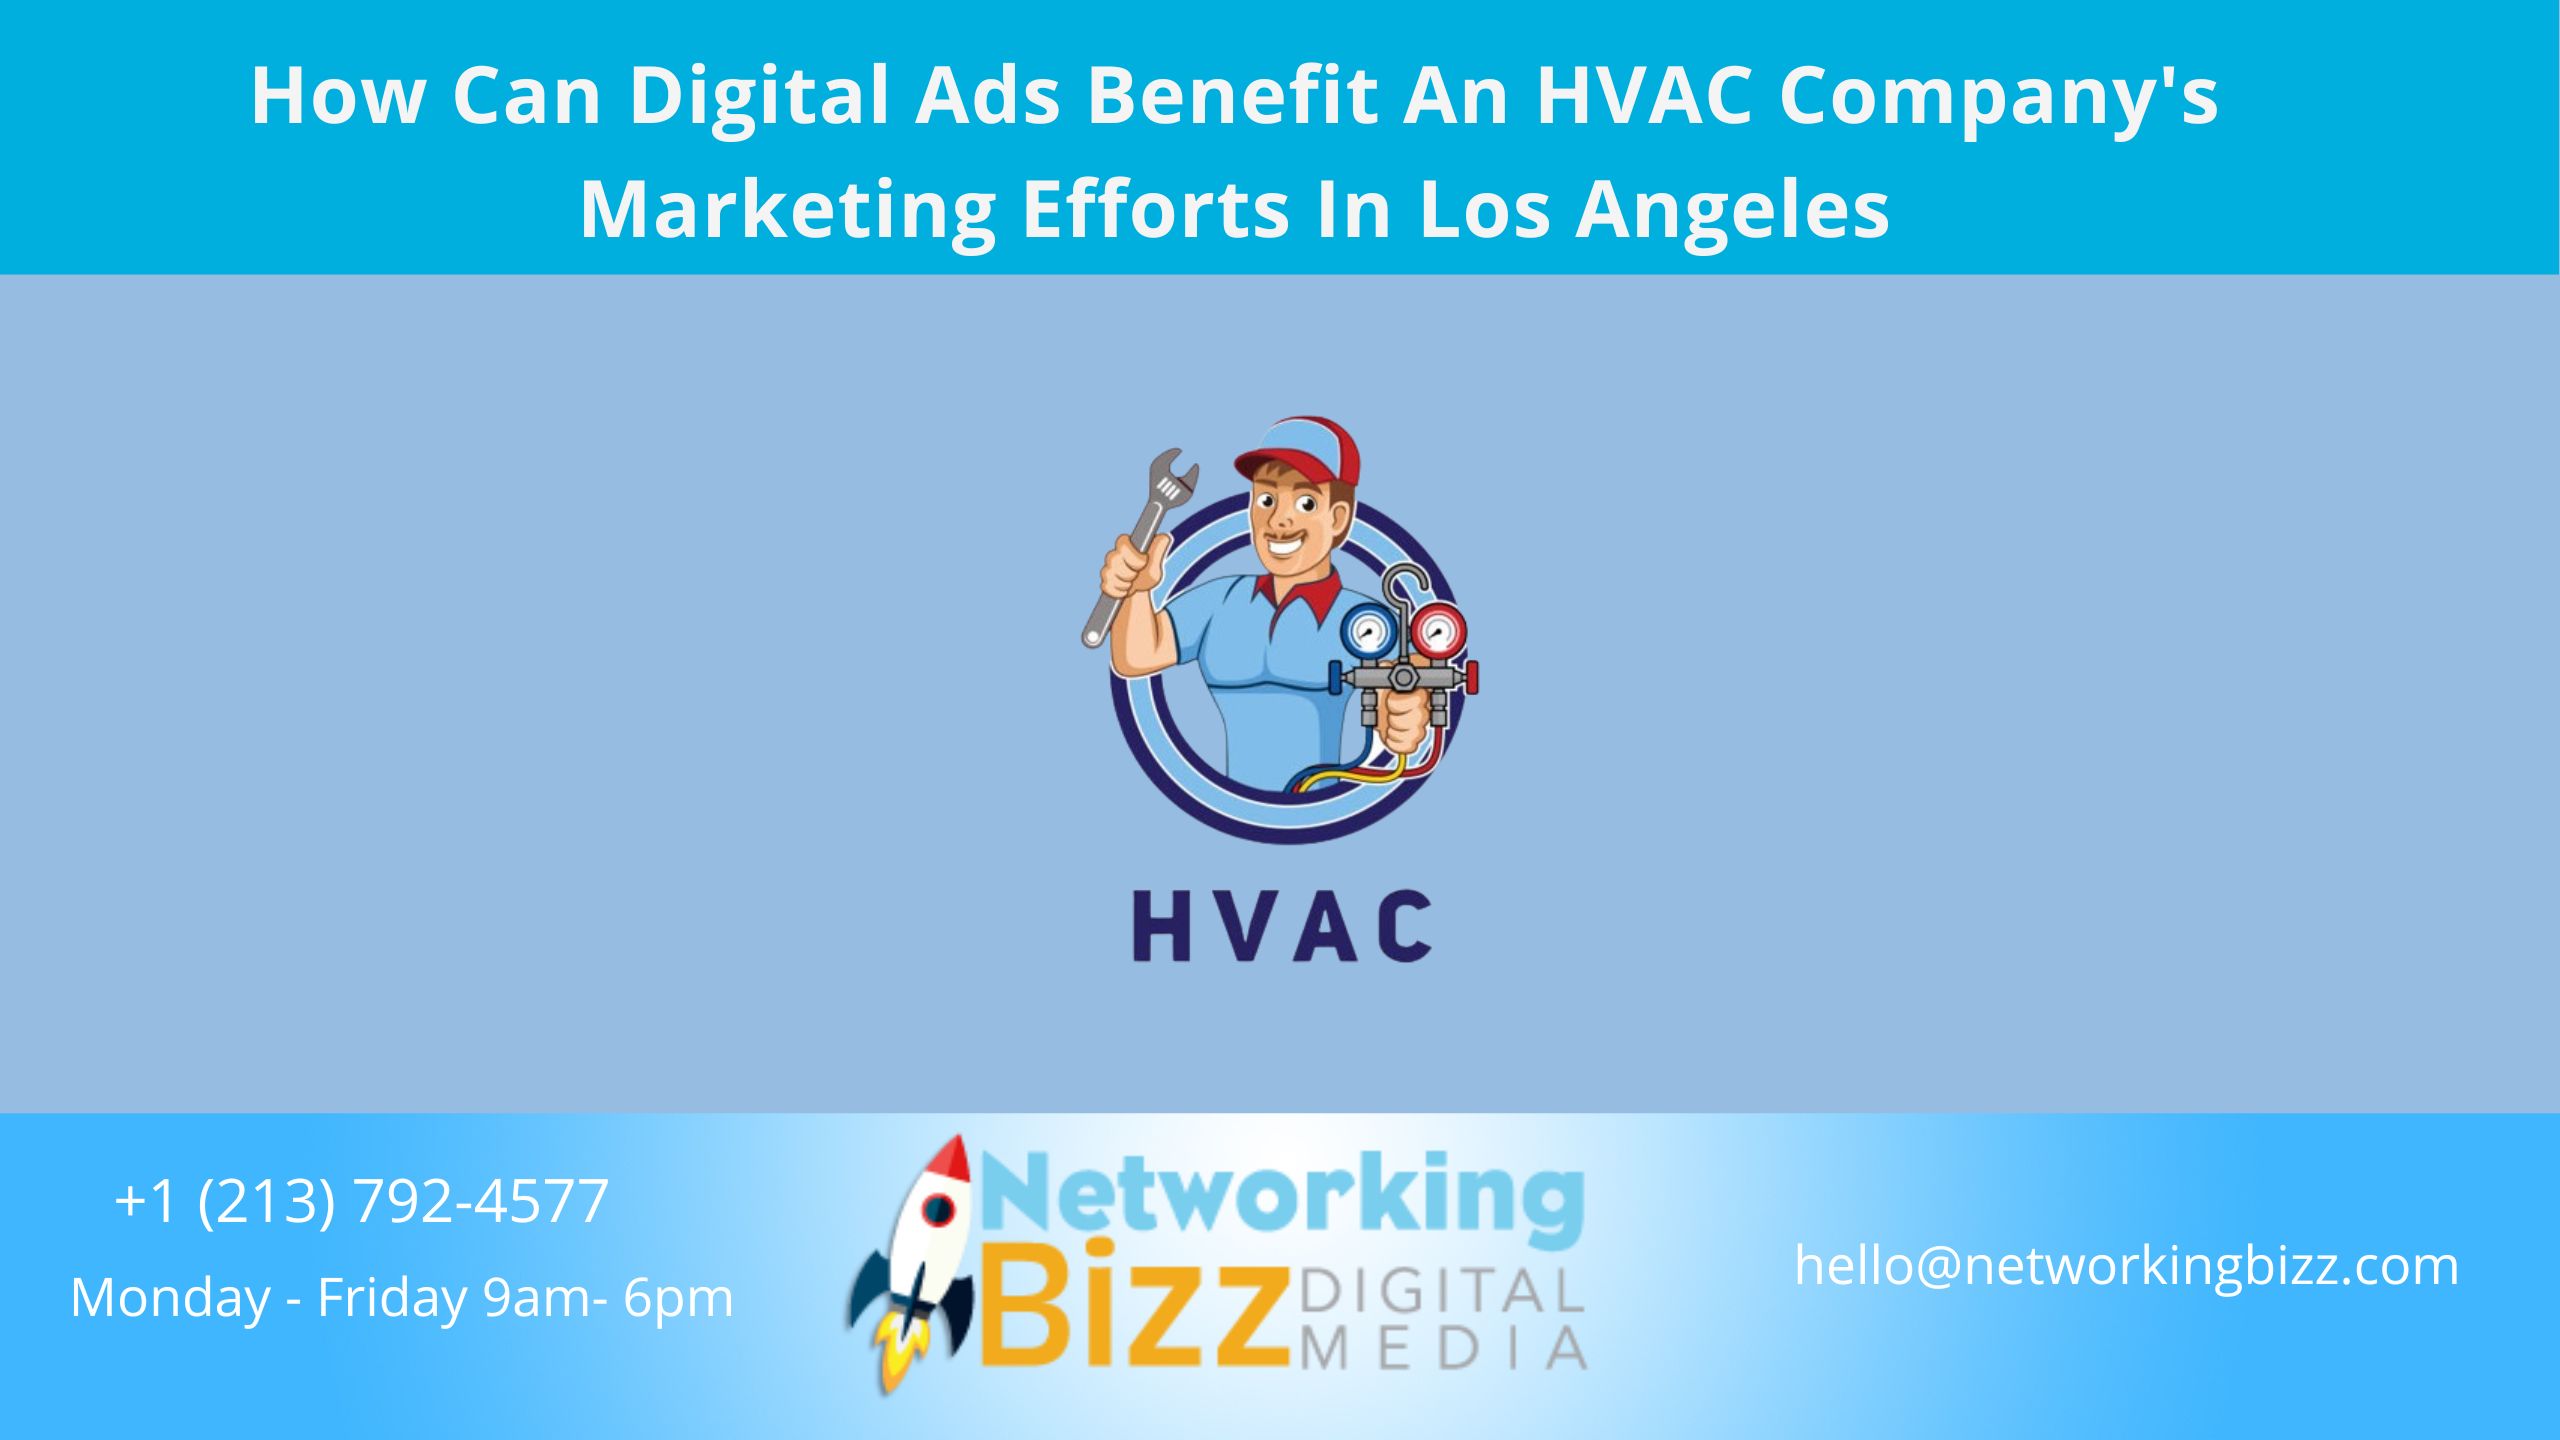 How Can Digital Ads Benefit An HVAC Company’s Marketing Efforts In Los Angeles